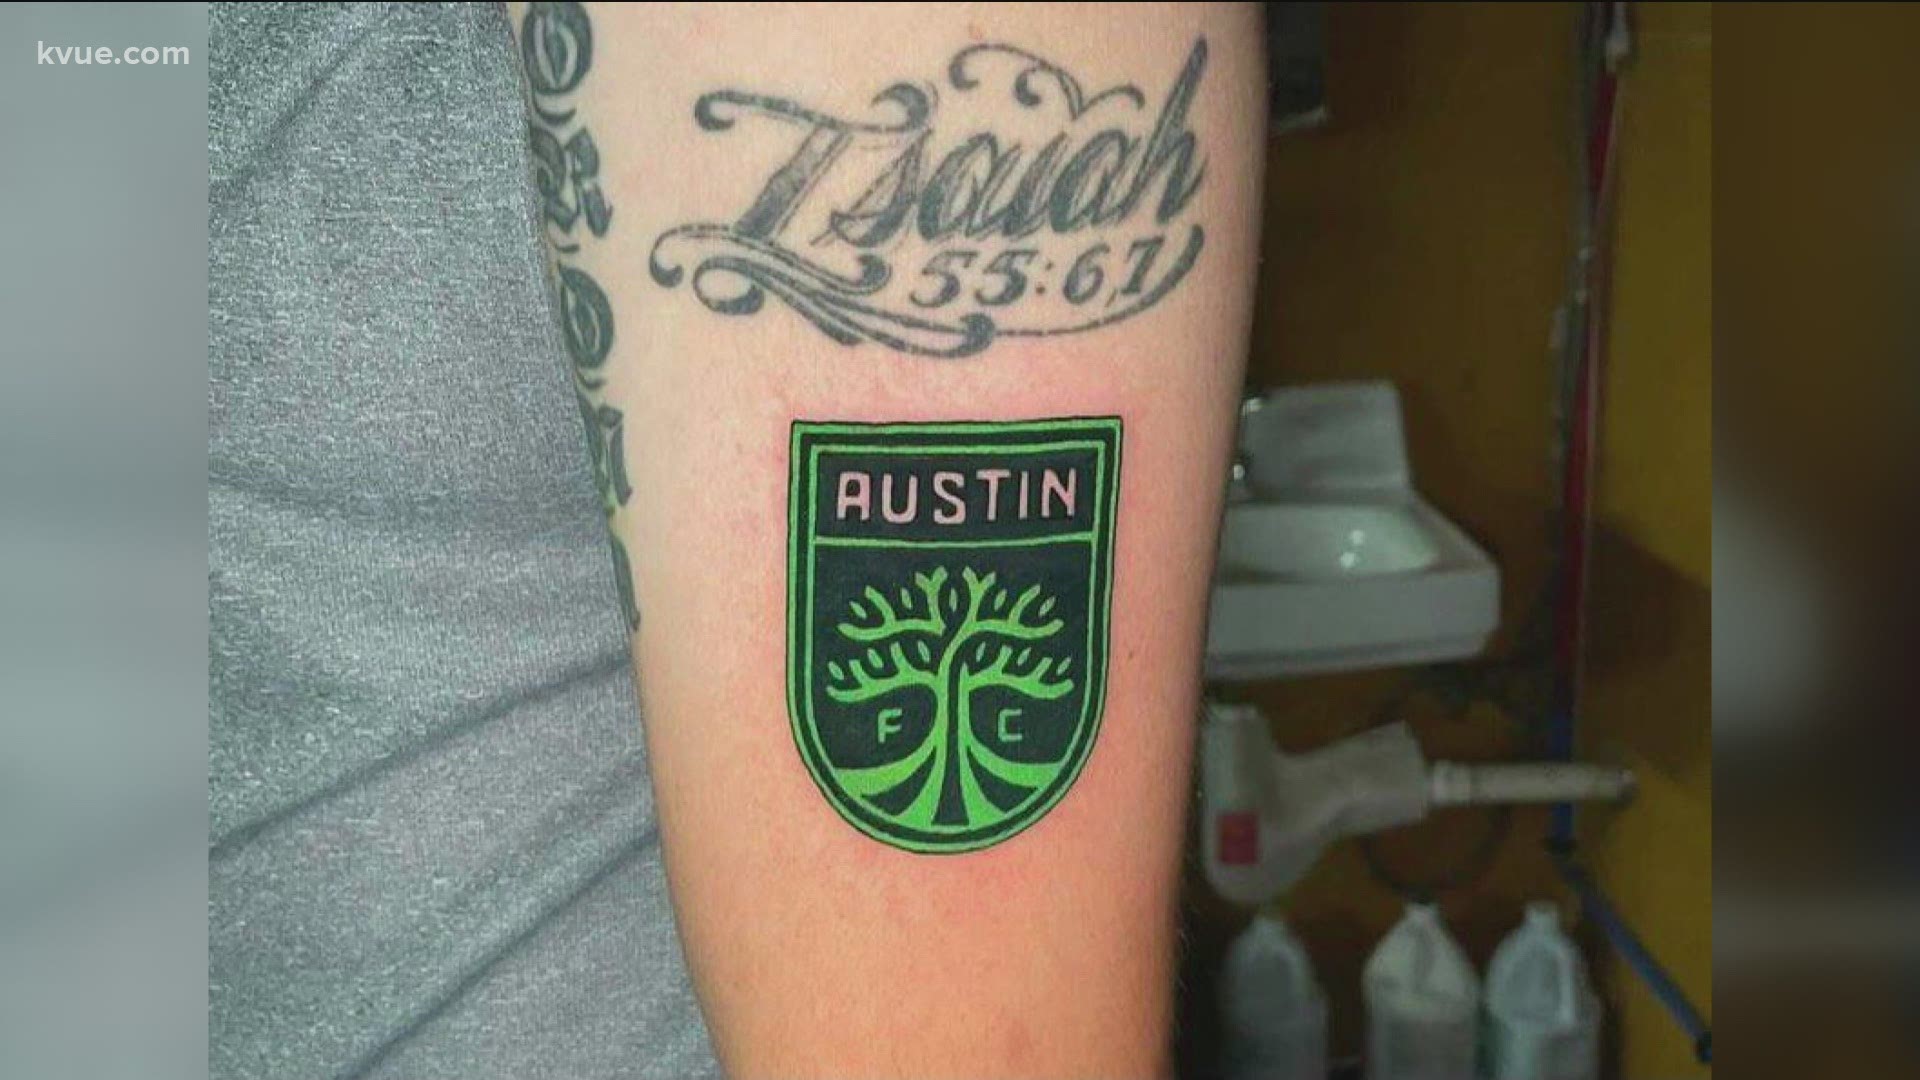 Triple Crown Tattoo Parlor hosted a free tattoo event for Austin FC fans.